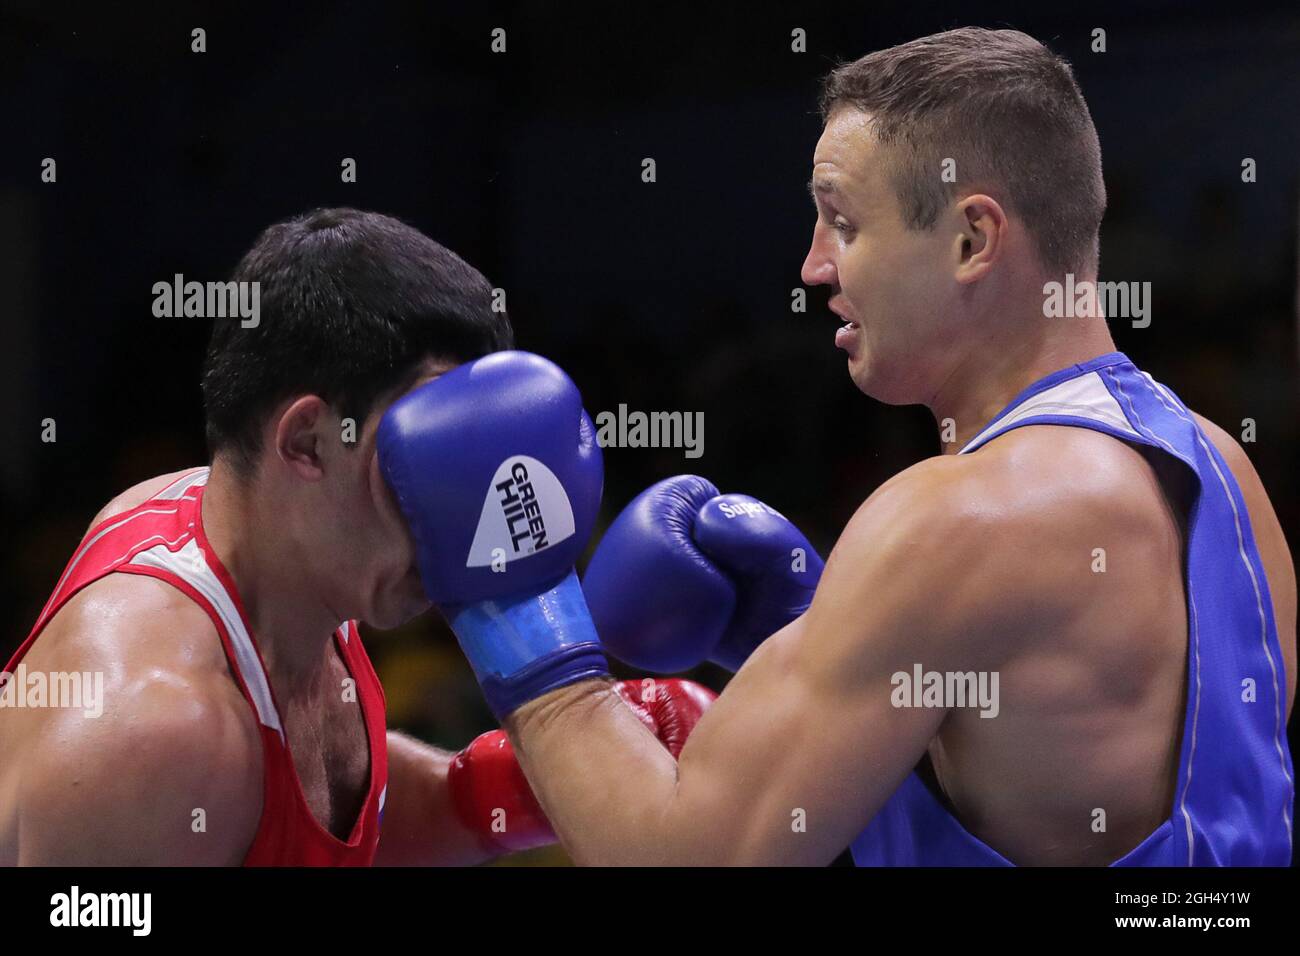 Kemerovo, Russia. 4th Sep, 2021. Vladimir Uzunyan of Moscow (L) and Andrei  Stotsky of the Chelyabinsk Region compete in the -92 kg final at the 2021  Russian Boxing Championships at the Arena